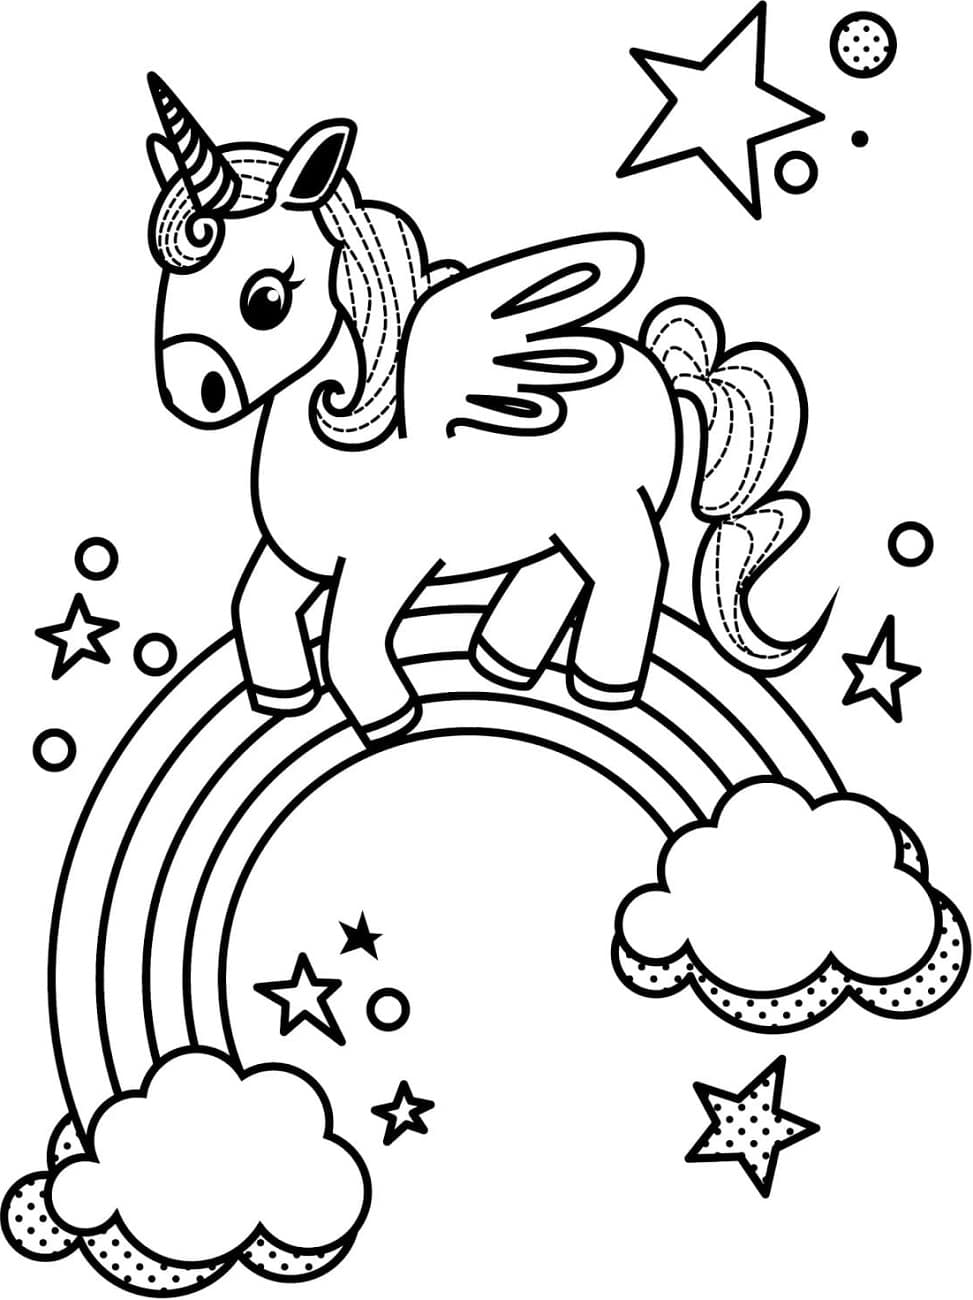 unicorn-kitty-coloring-coloring-pages